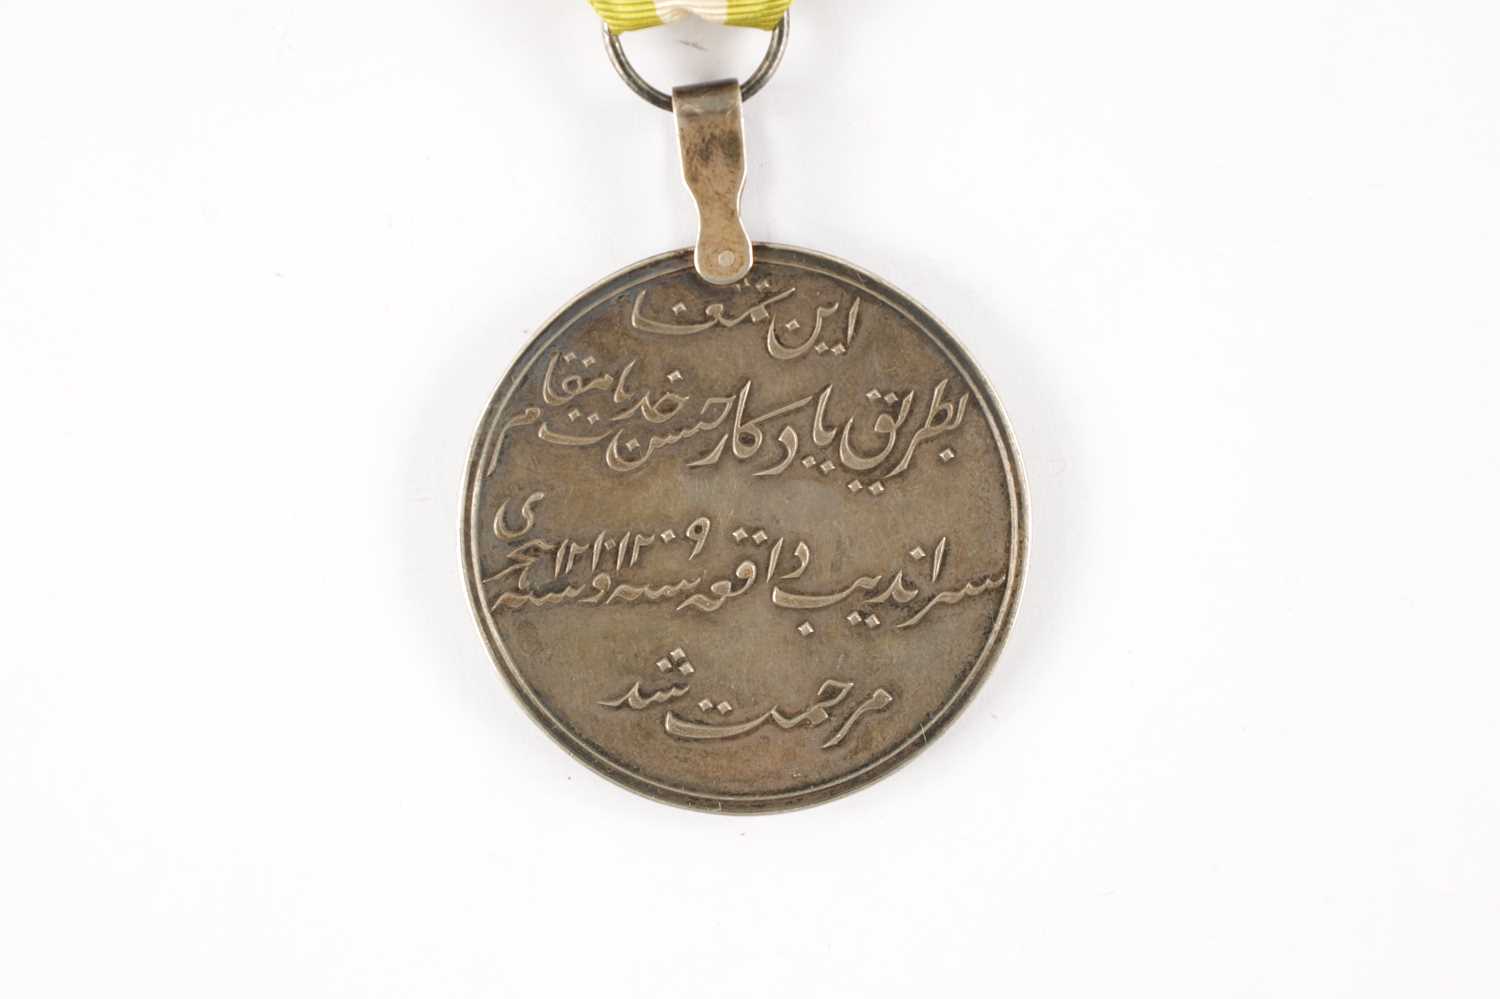 AN EAST INDIAN COMPANY CEYLON SILVER MEDAL 1795-96. - Image 3 of 4